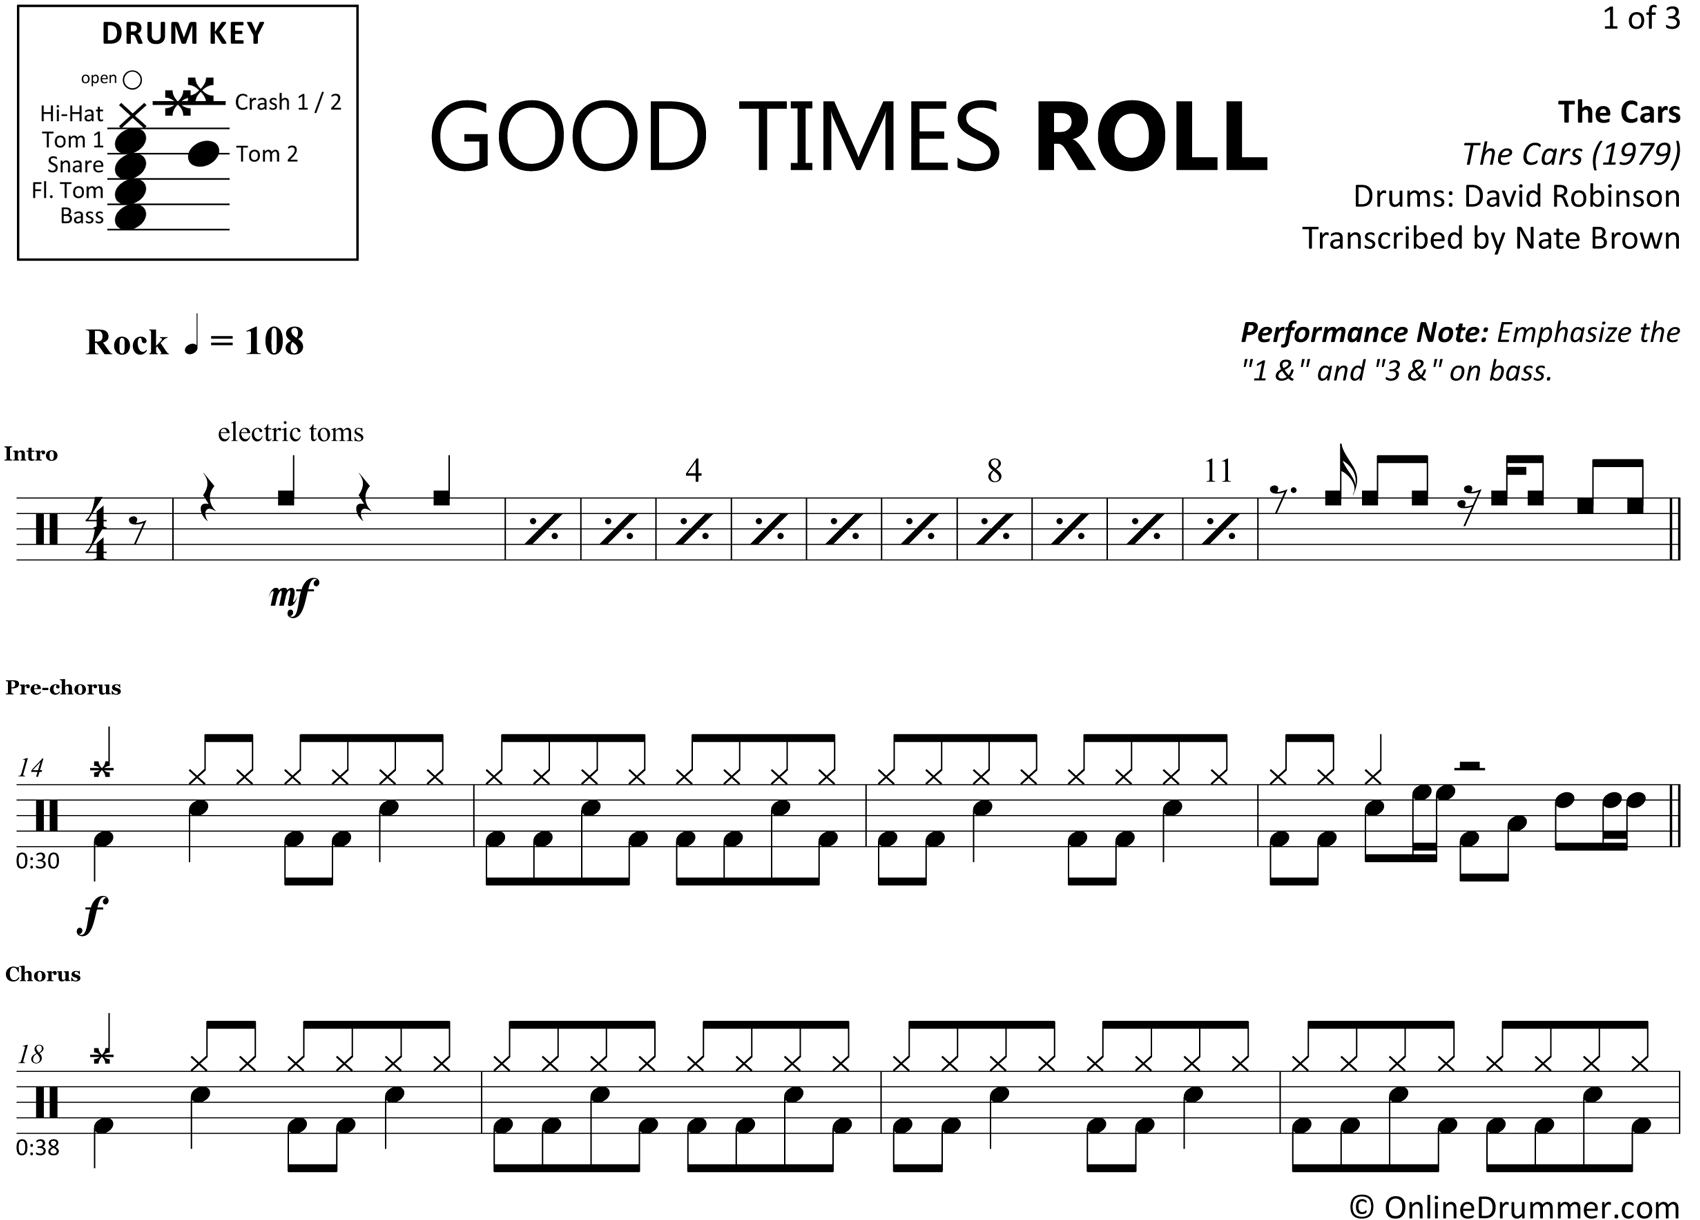 Good Times Roll - The Cars - Drum Sheet Music